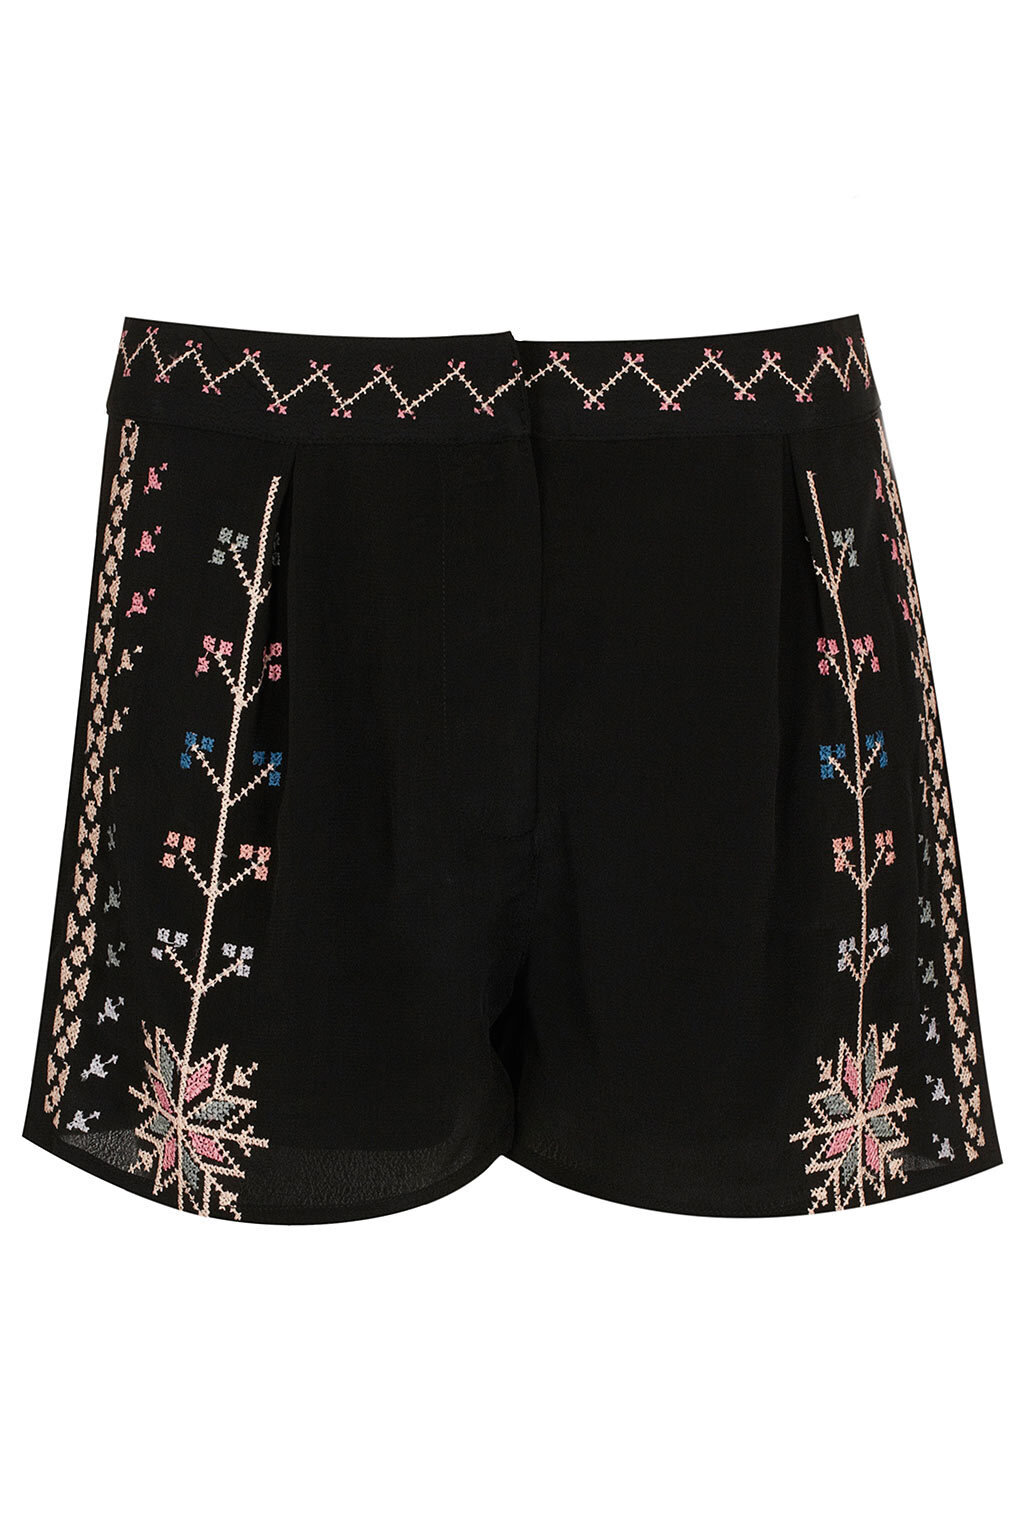 Topshop Aztec Embroidered Shorts in Black.jpg